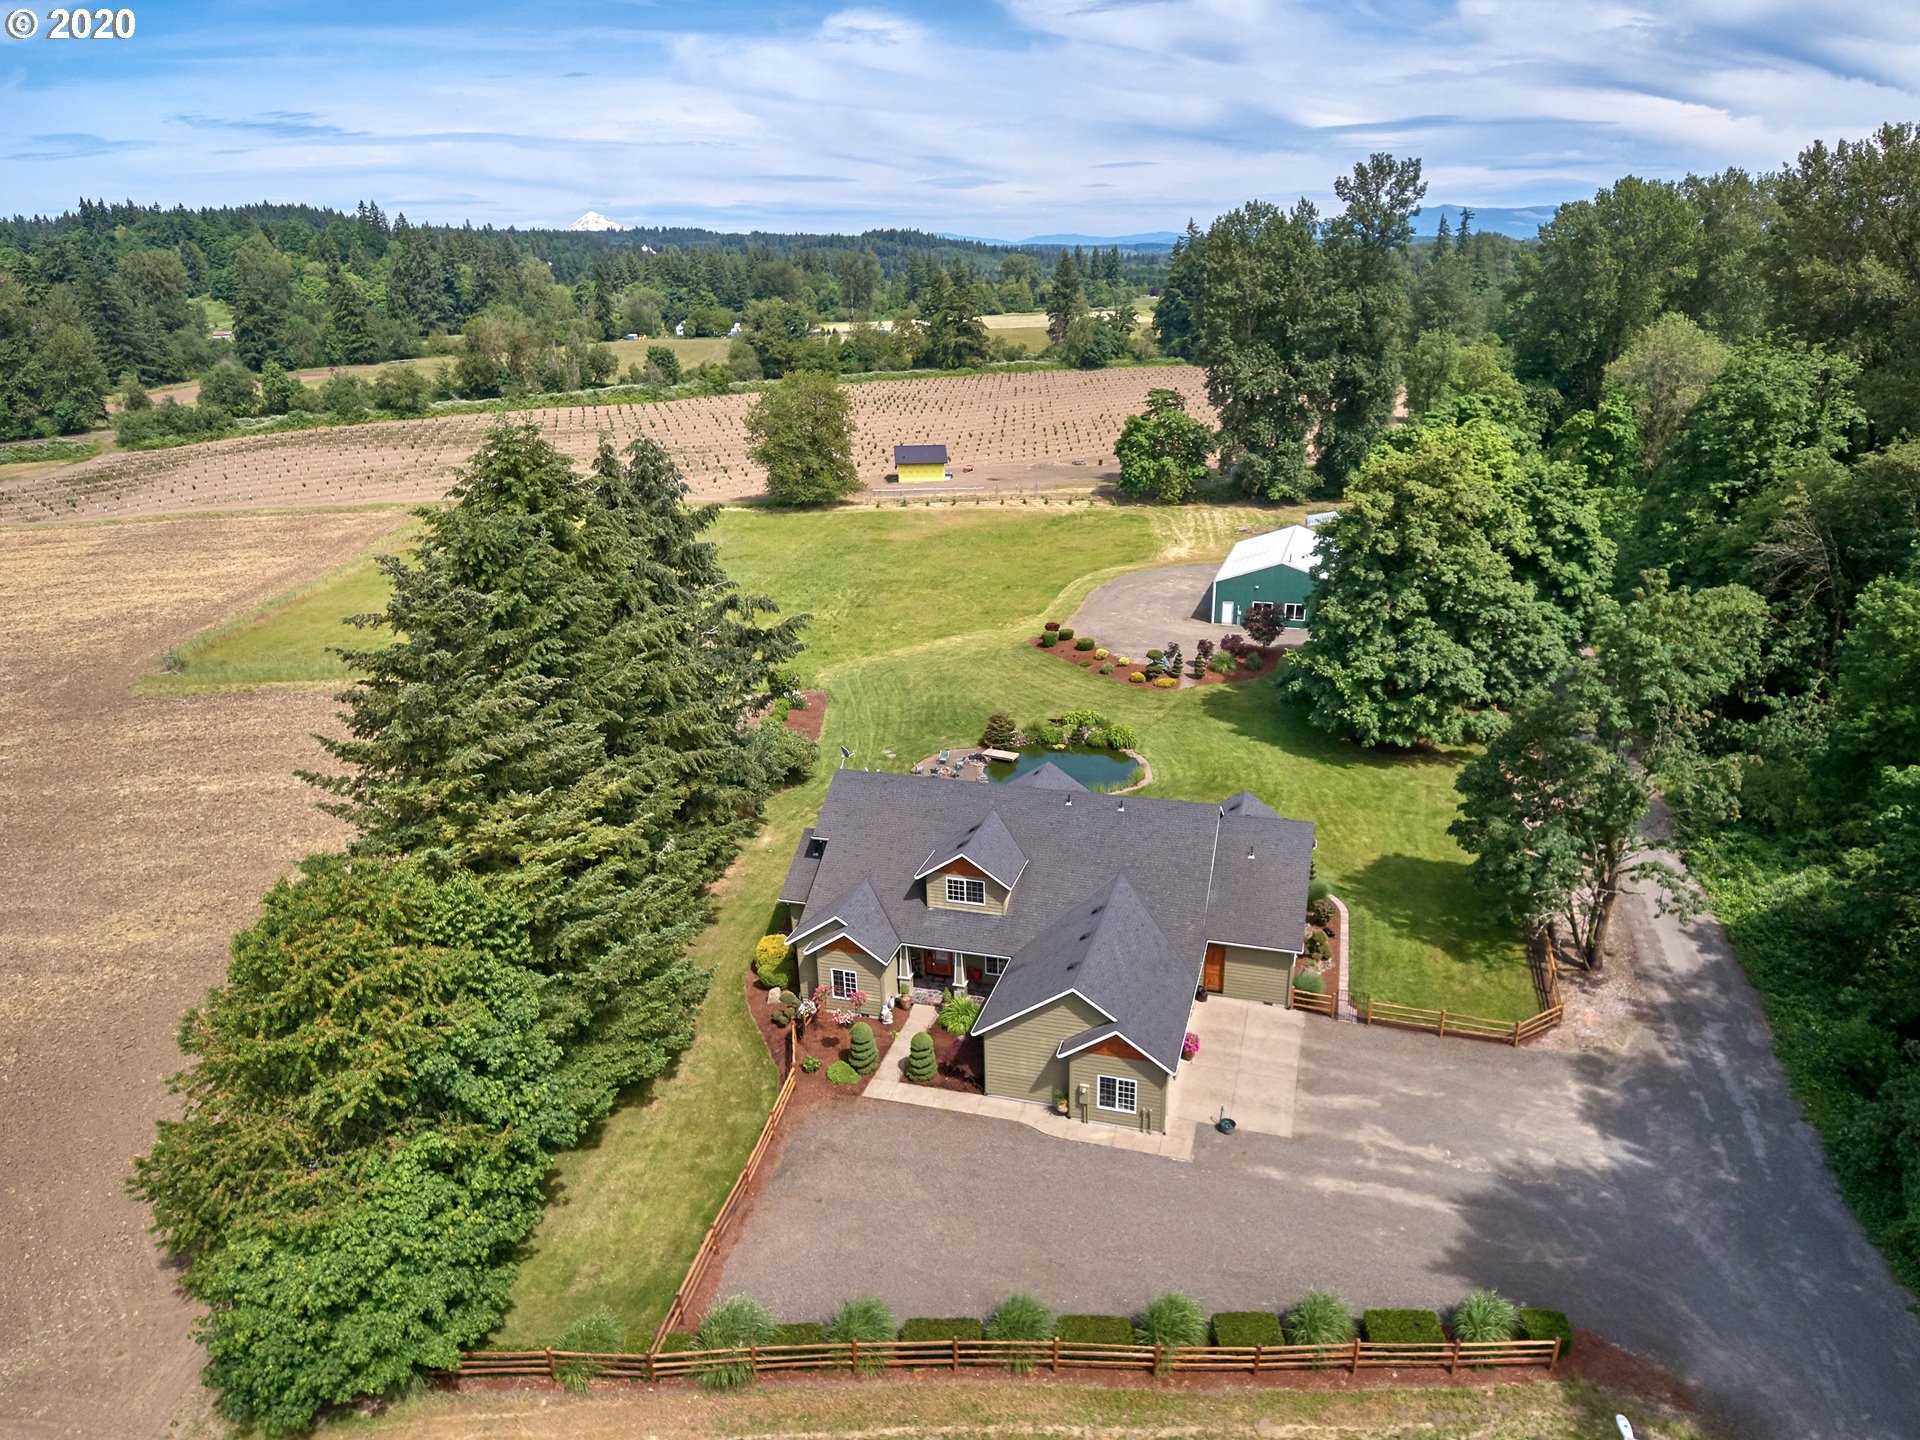 25604 S MOLALLA FOREST RD (1 of 1)